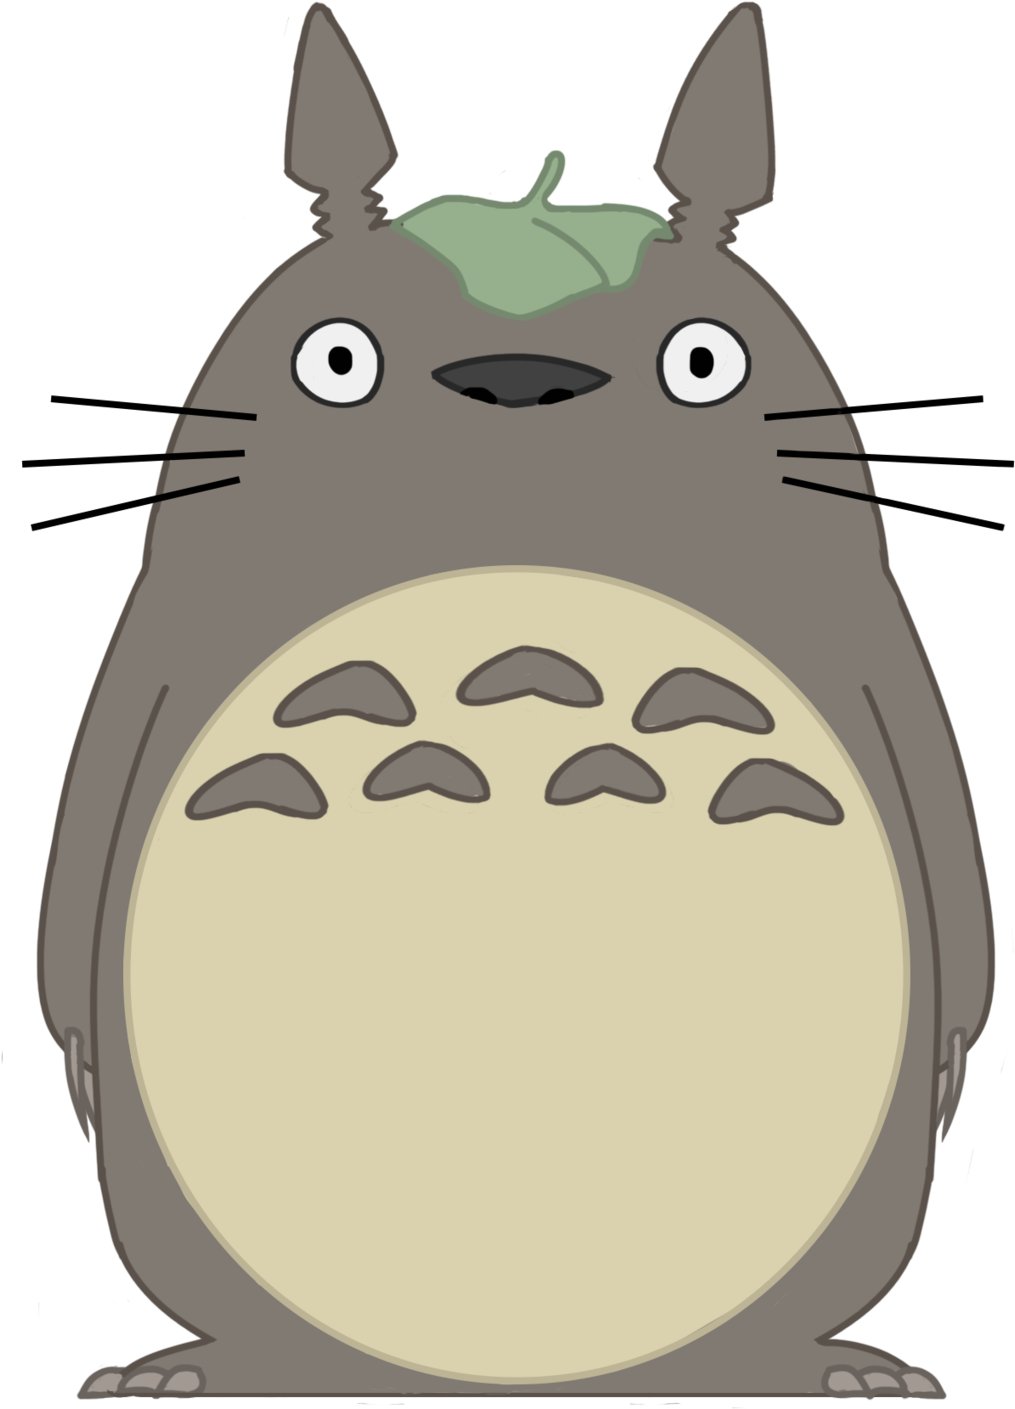 Download and share clipart about Totoro With Leaf By Imhereforthedrarry Tot...